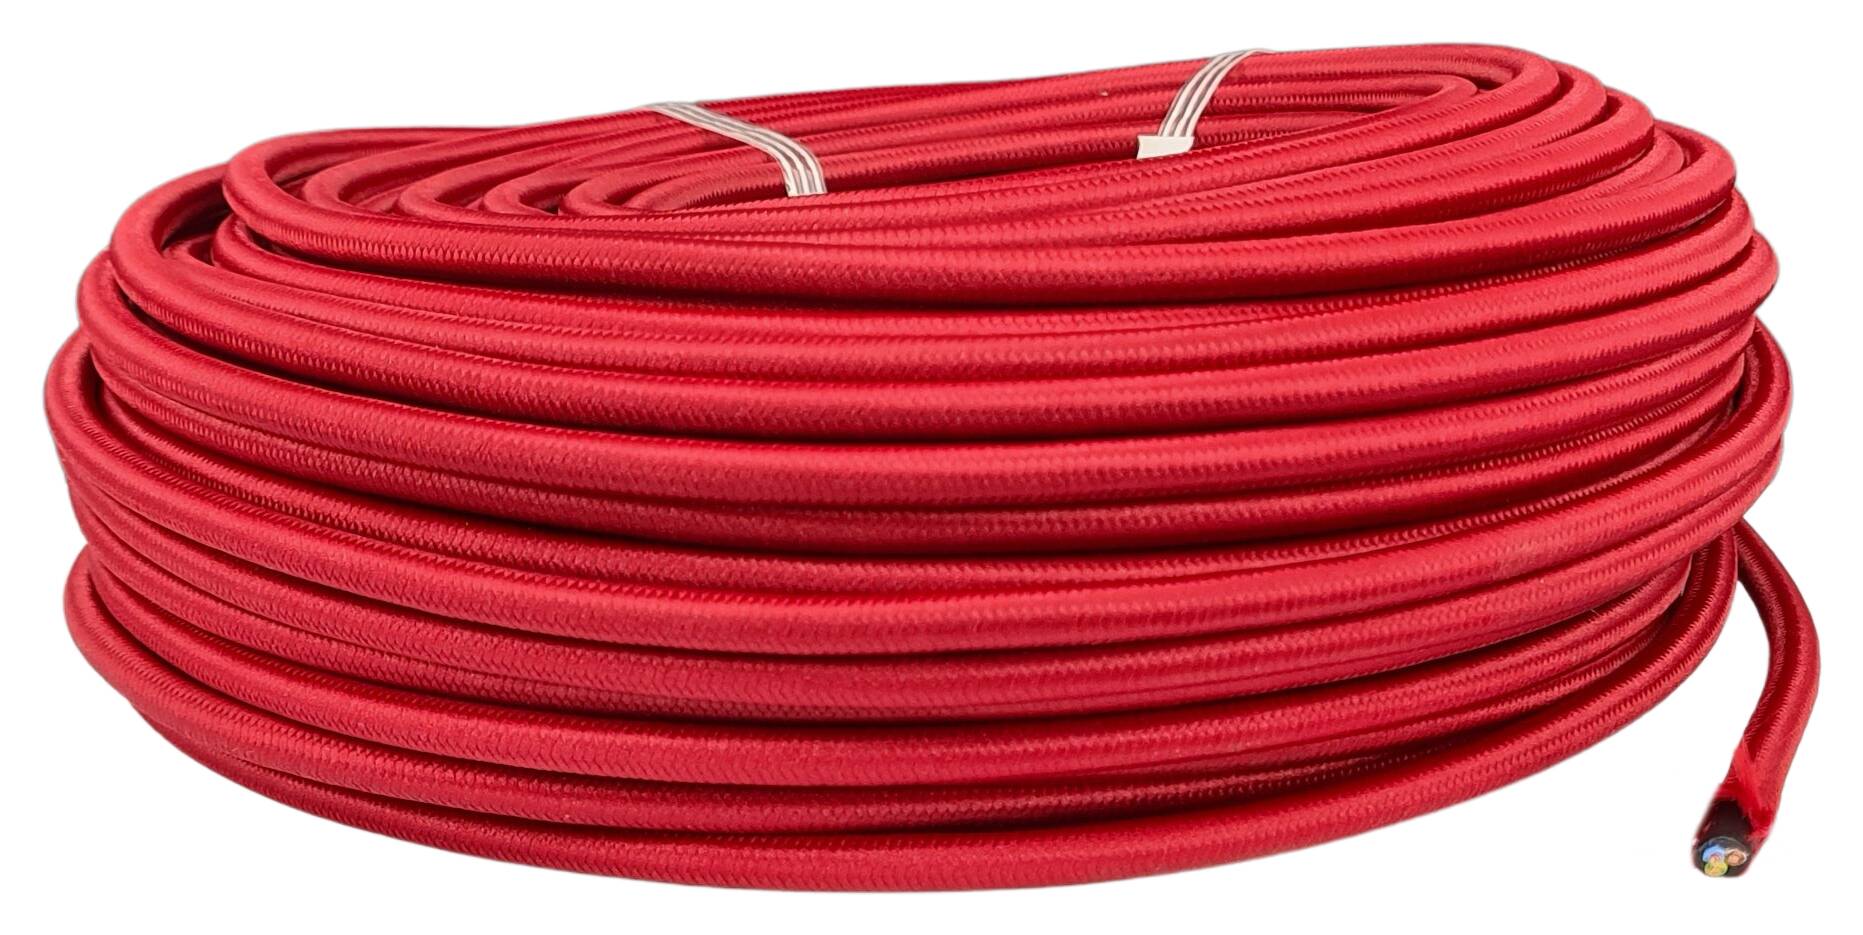 cable 3G 0,75 H33VV-F textile braided RAL 3005 bordeaux